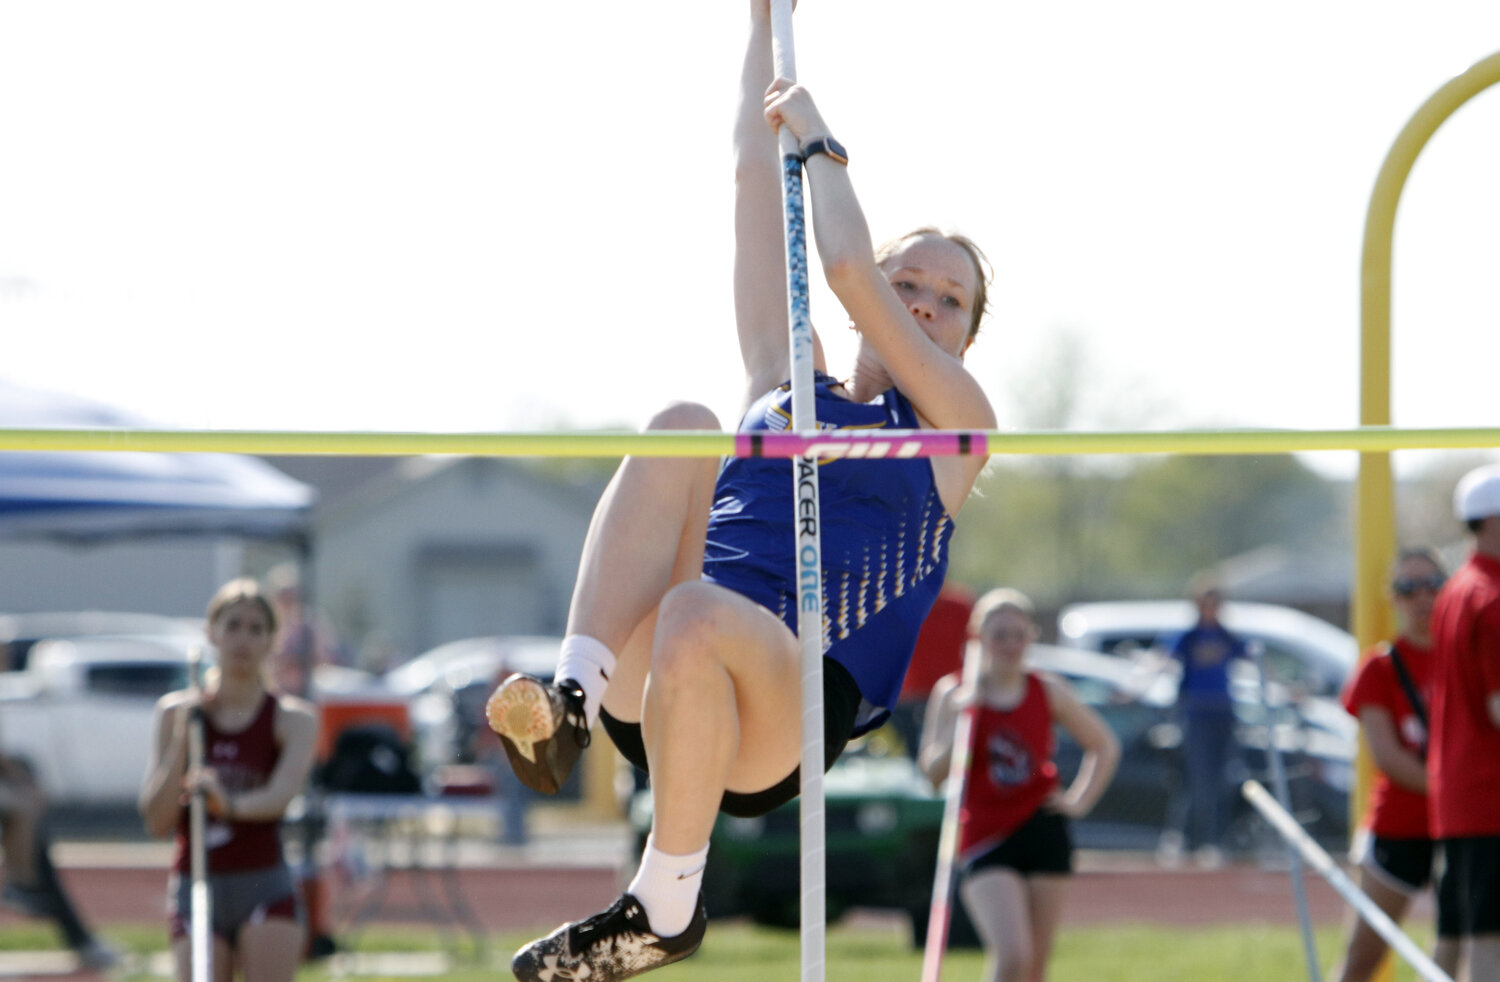 Wright City's Kaedyn Johnson attempts to clear the bar during the pole vault competition at last week's Wright City Invite.